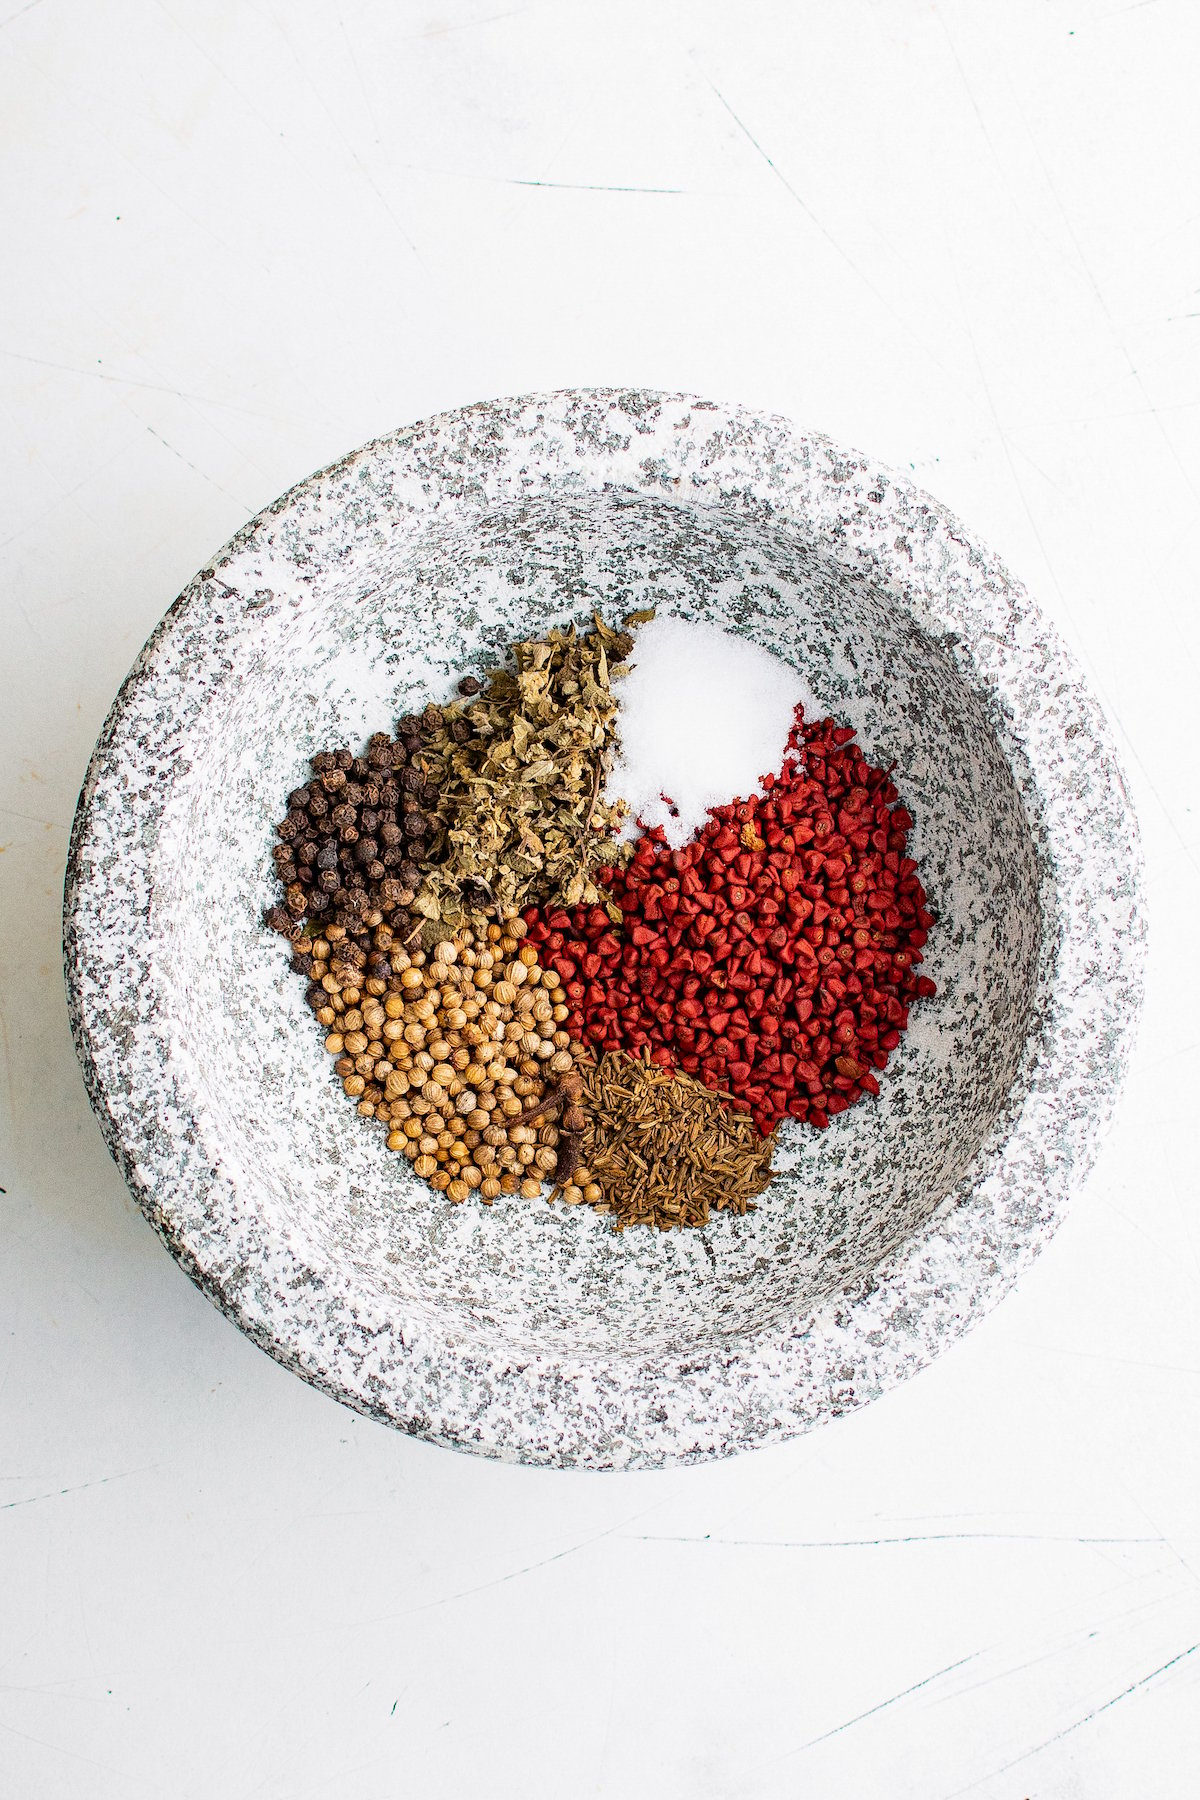 whole dried spices in a mortar and pestle